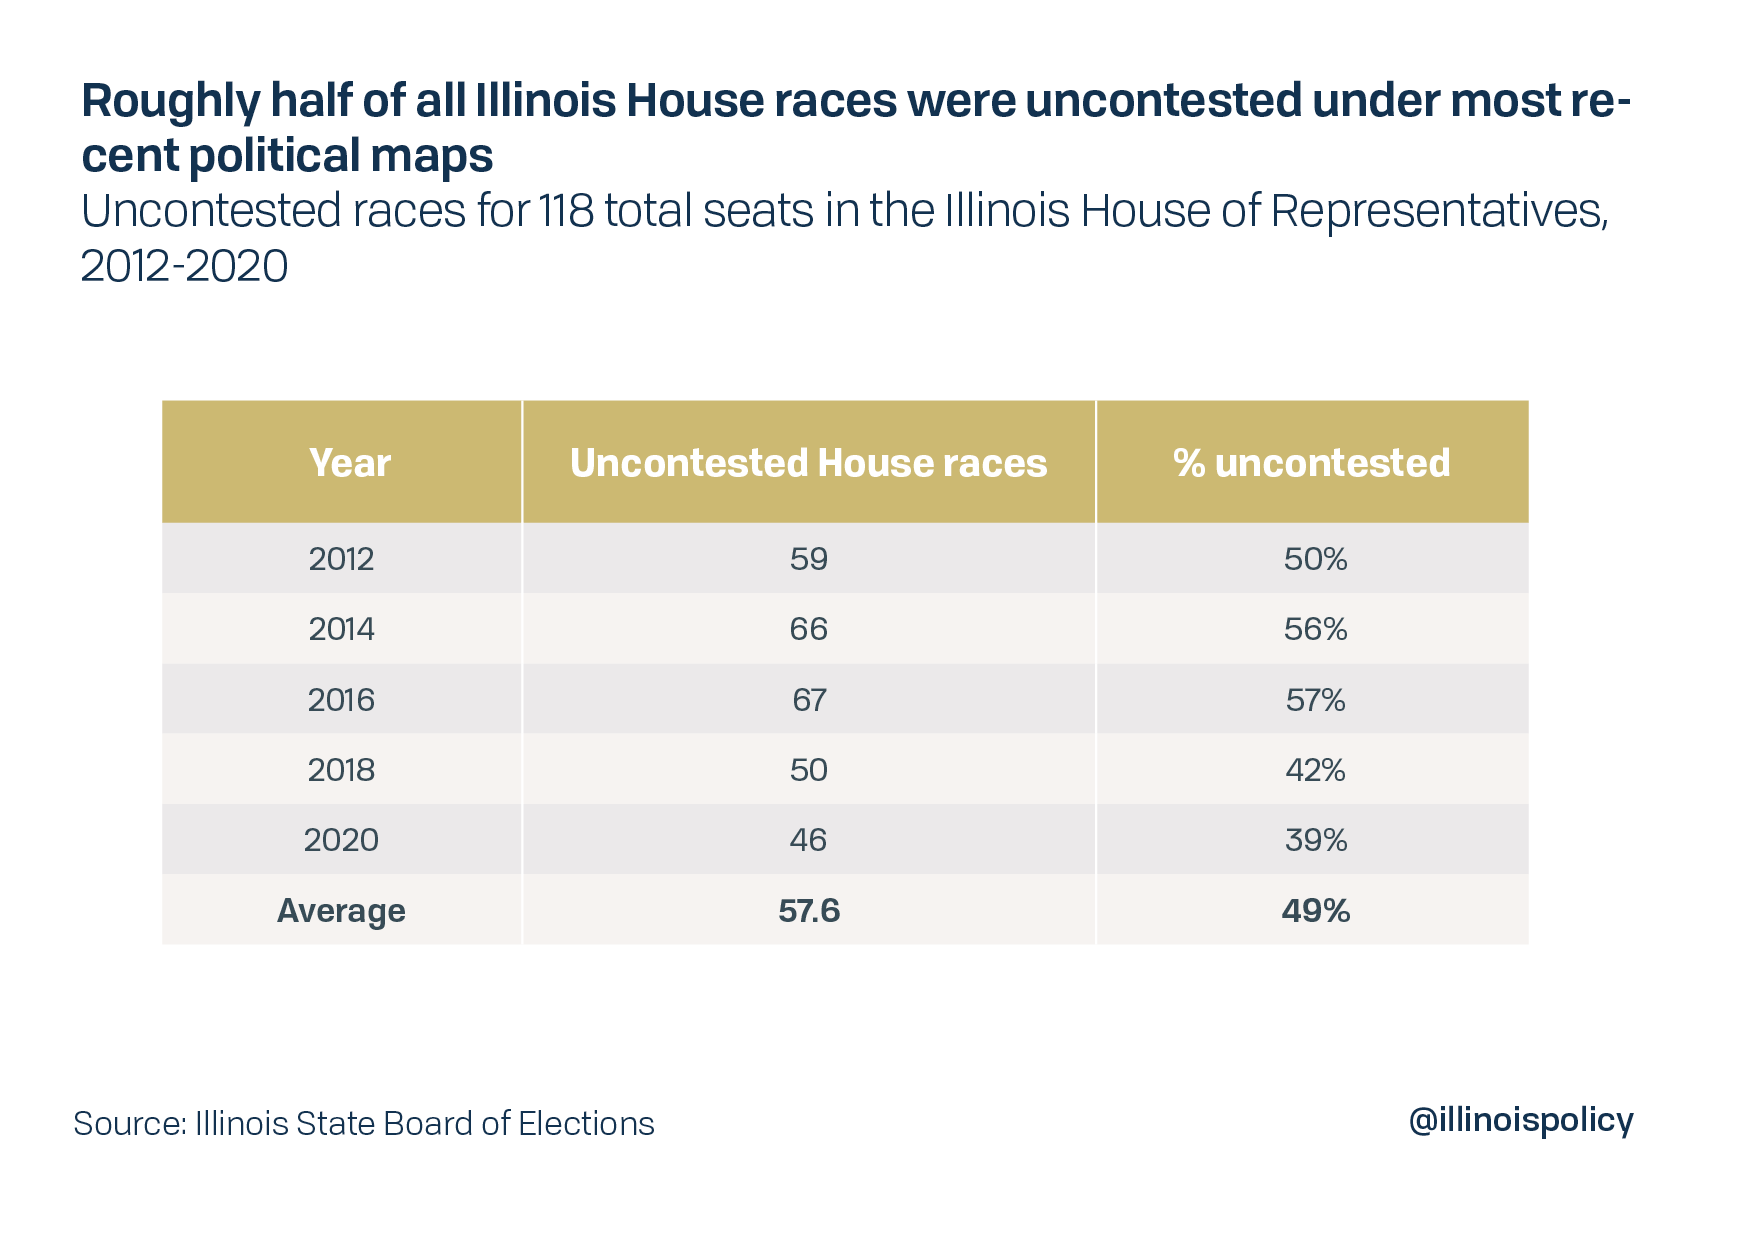 Roughly of all Illinois House races were uncontested under most recent political maps